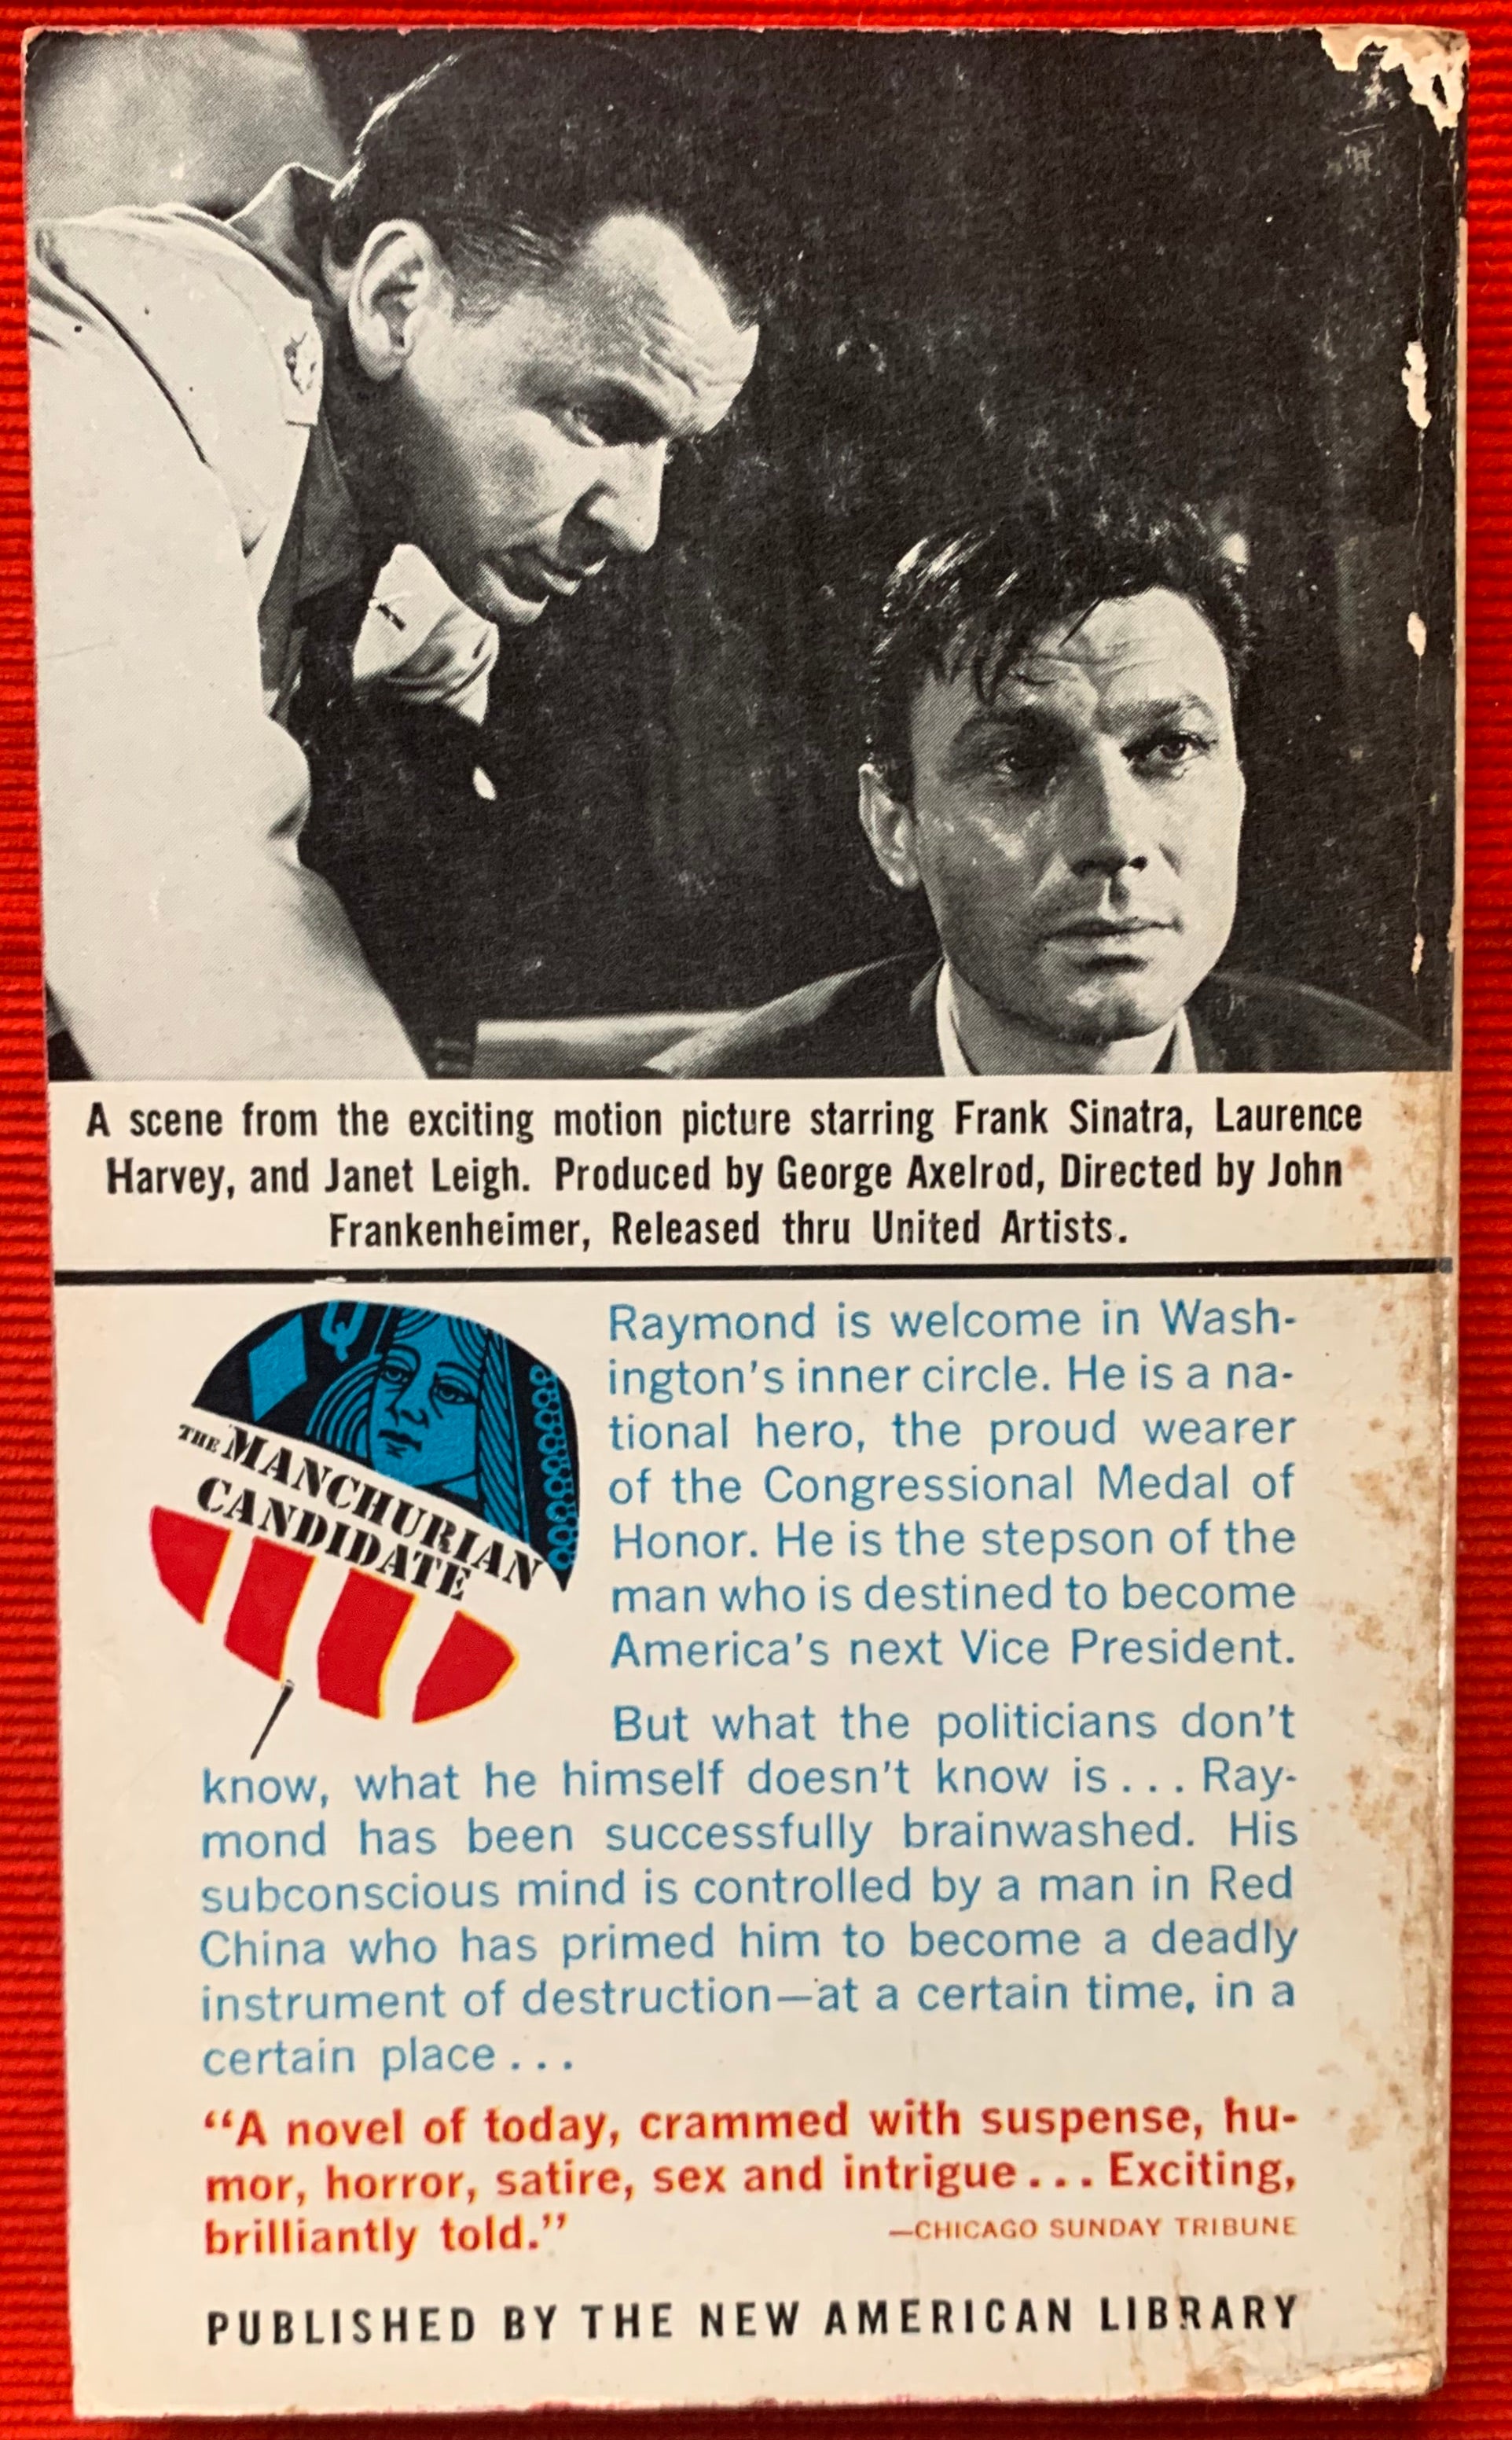 "The Manchurian Candidate" By Richard Condon